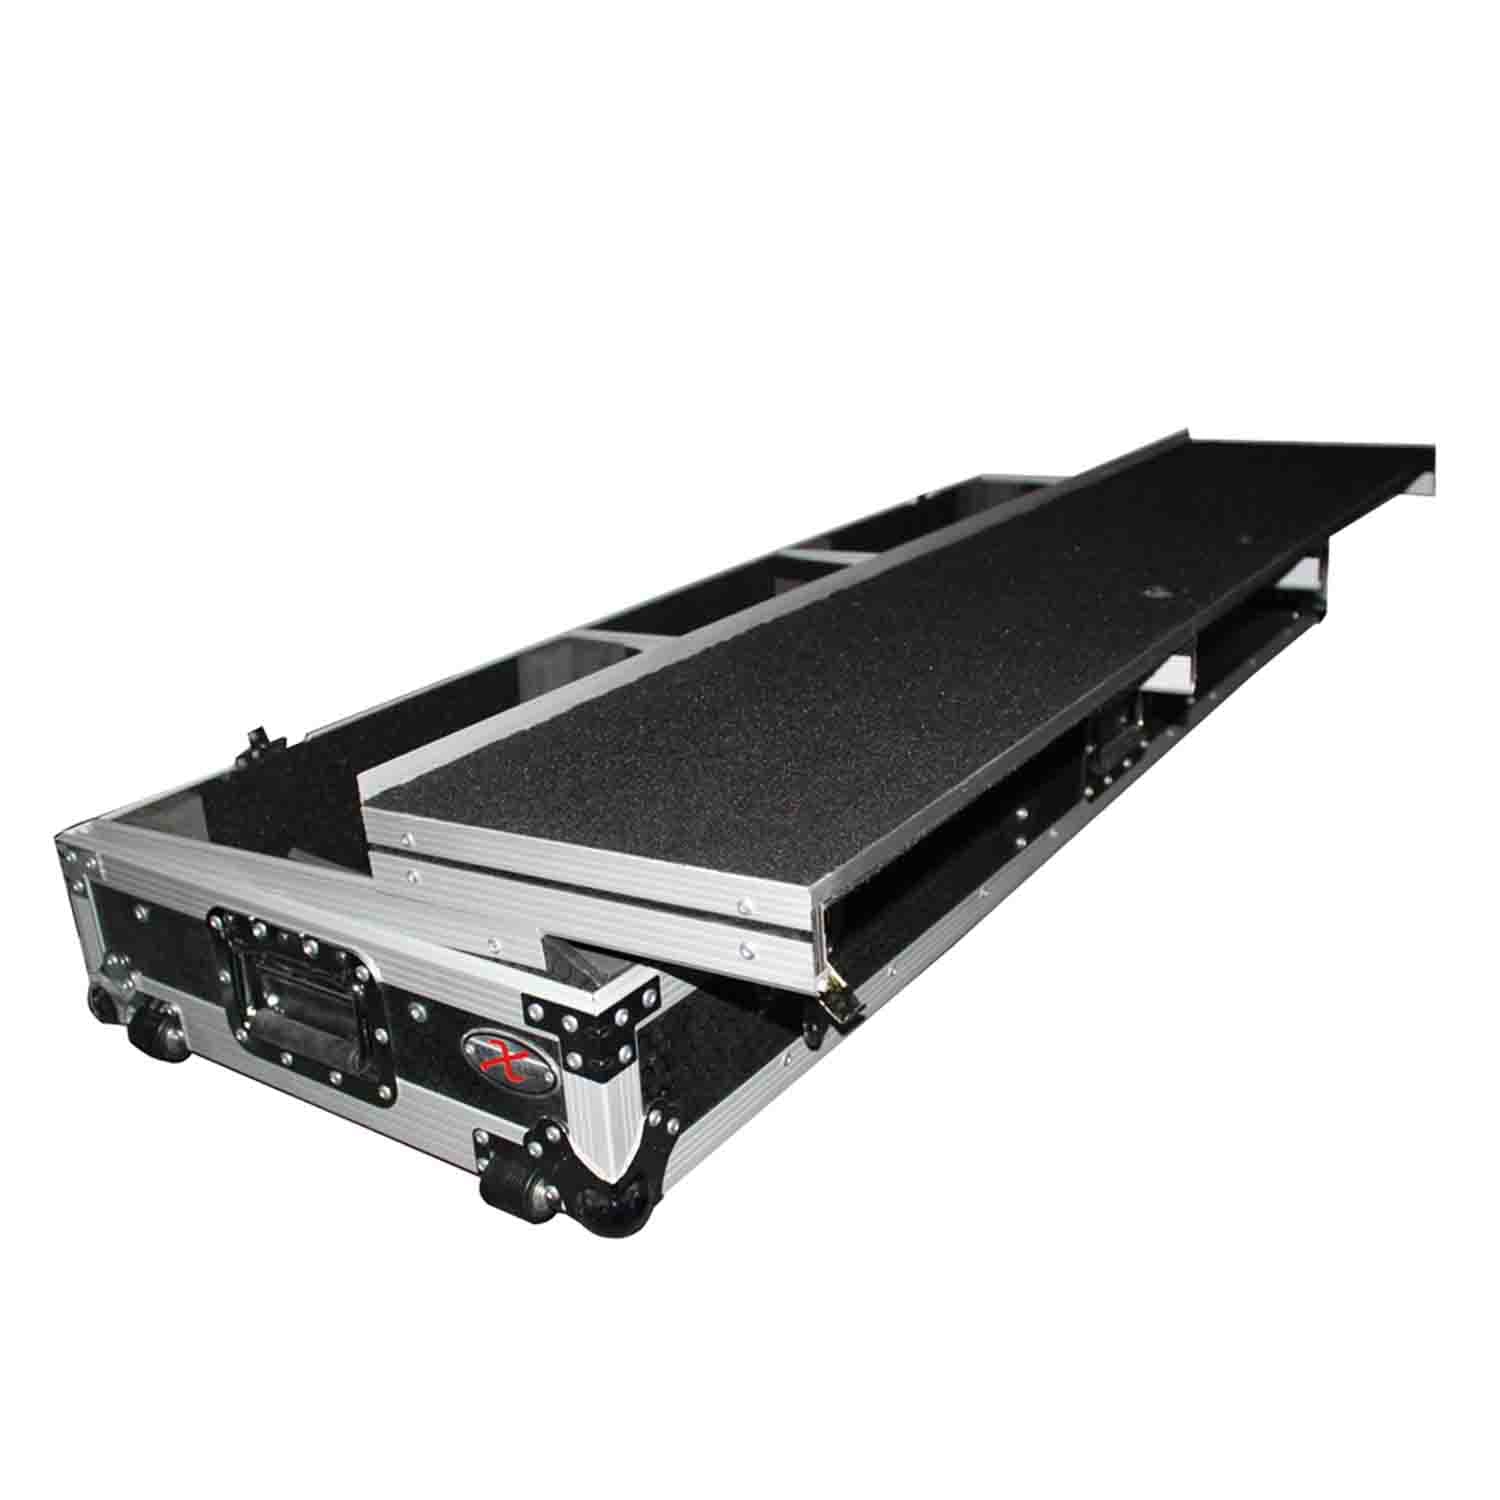 ProX XS-TMC1012WLTFSTND DJ Flight Case Coffin For 10" or 12" Mixer and 2 1200 style Turntables in Standard Mode - Hollywood DJ